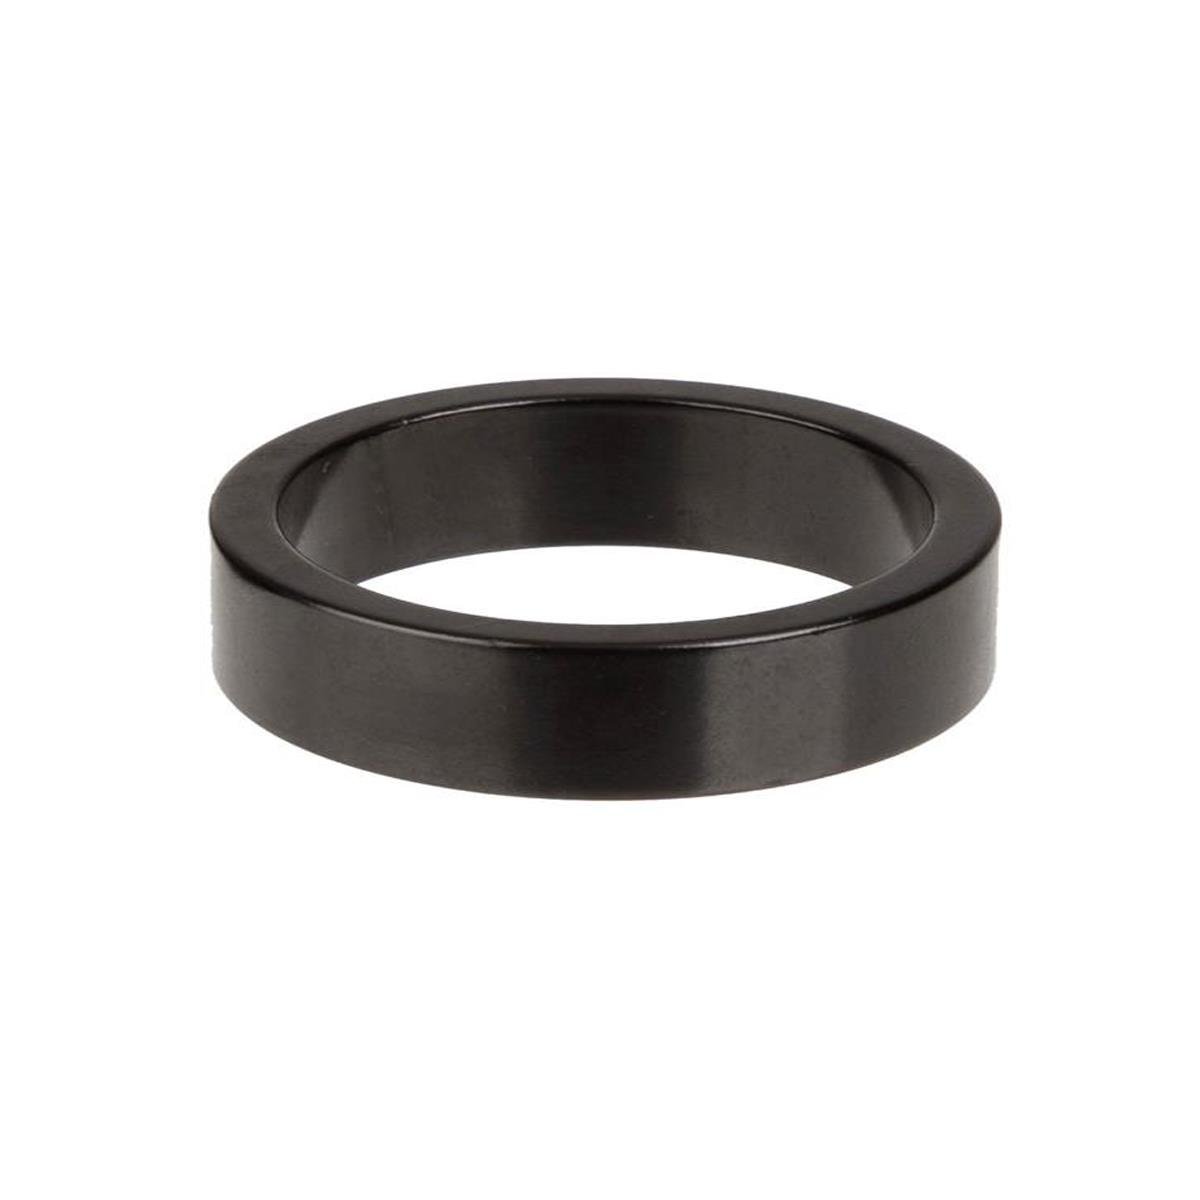 Cane Creek Top Spacer 40 Black, 1 1/8 Inches, 10 mm